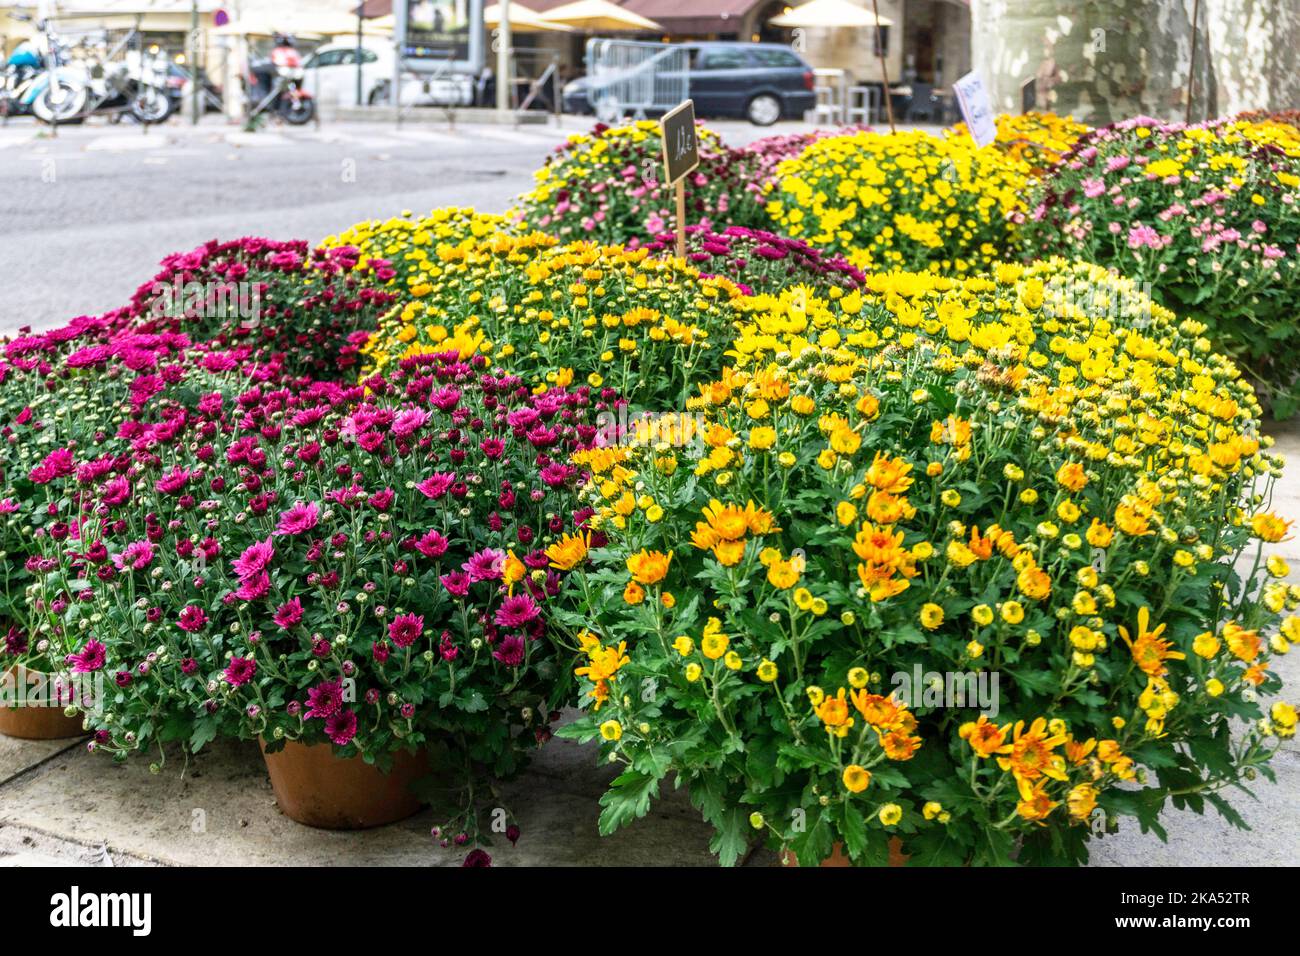 A very colourful collection of chrysanthemum flowers outside a flower shop in Uzes, France Stock Photo